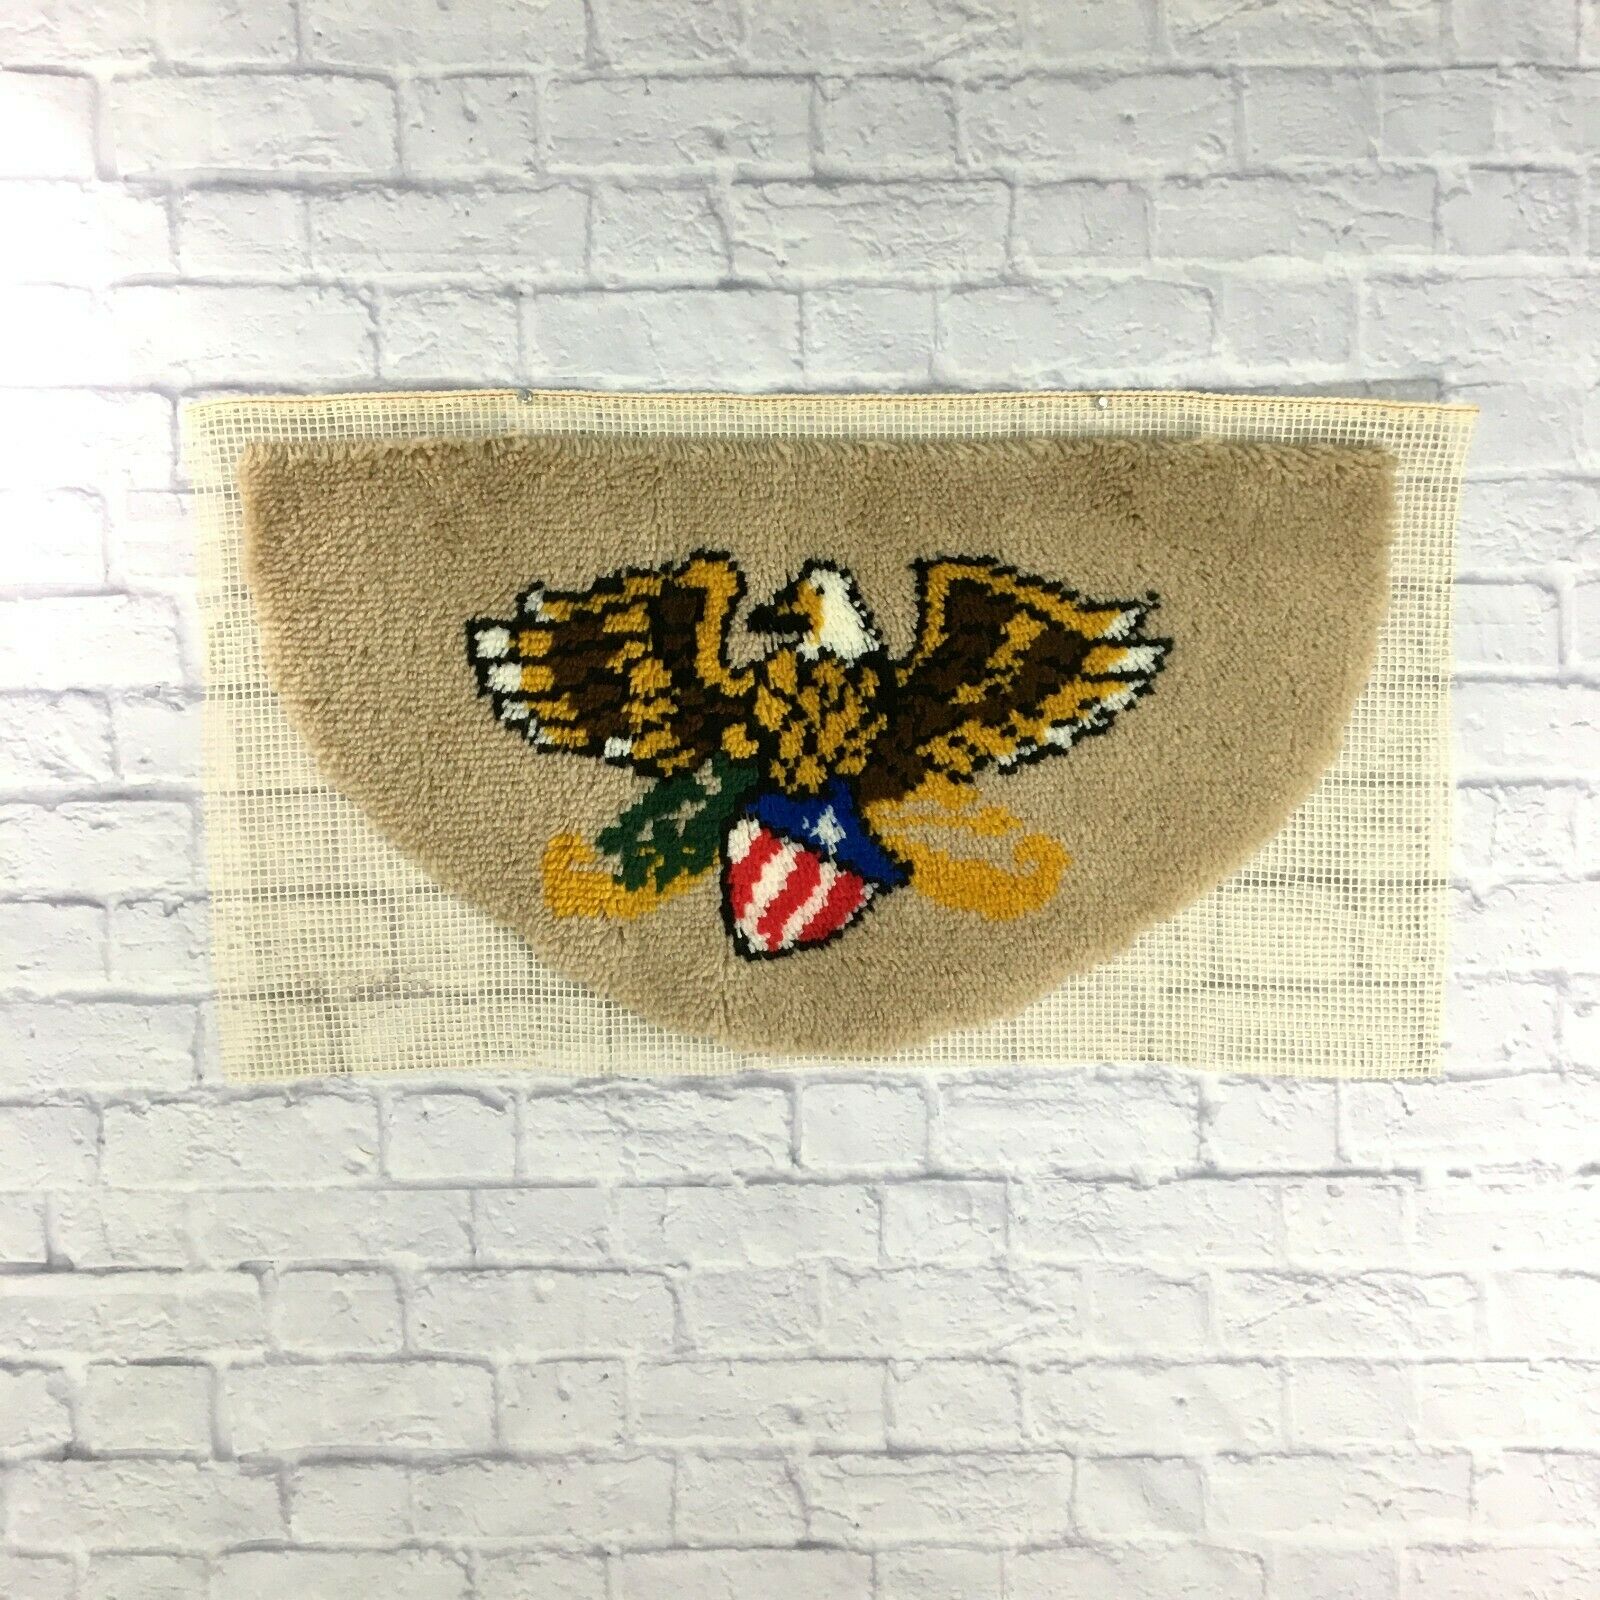 Bald Eagle Shield Vintage Completed Latch Hook Rug 18" X 33" Retro Wall Decor